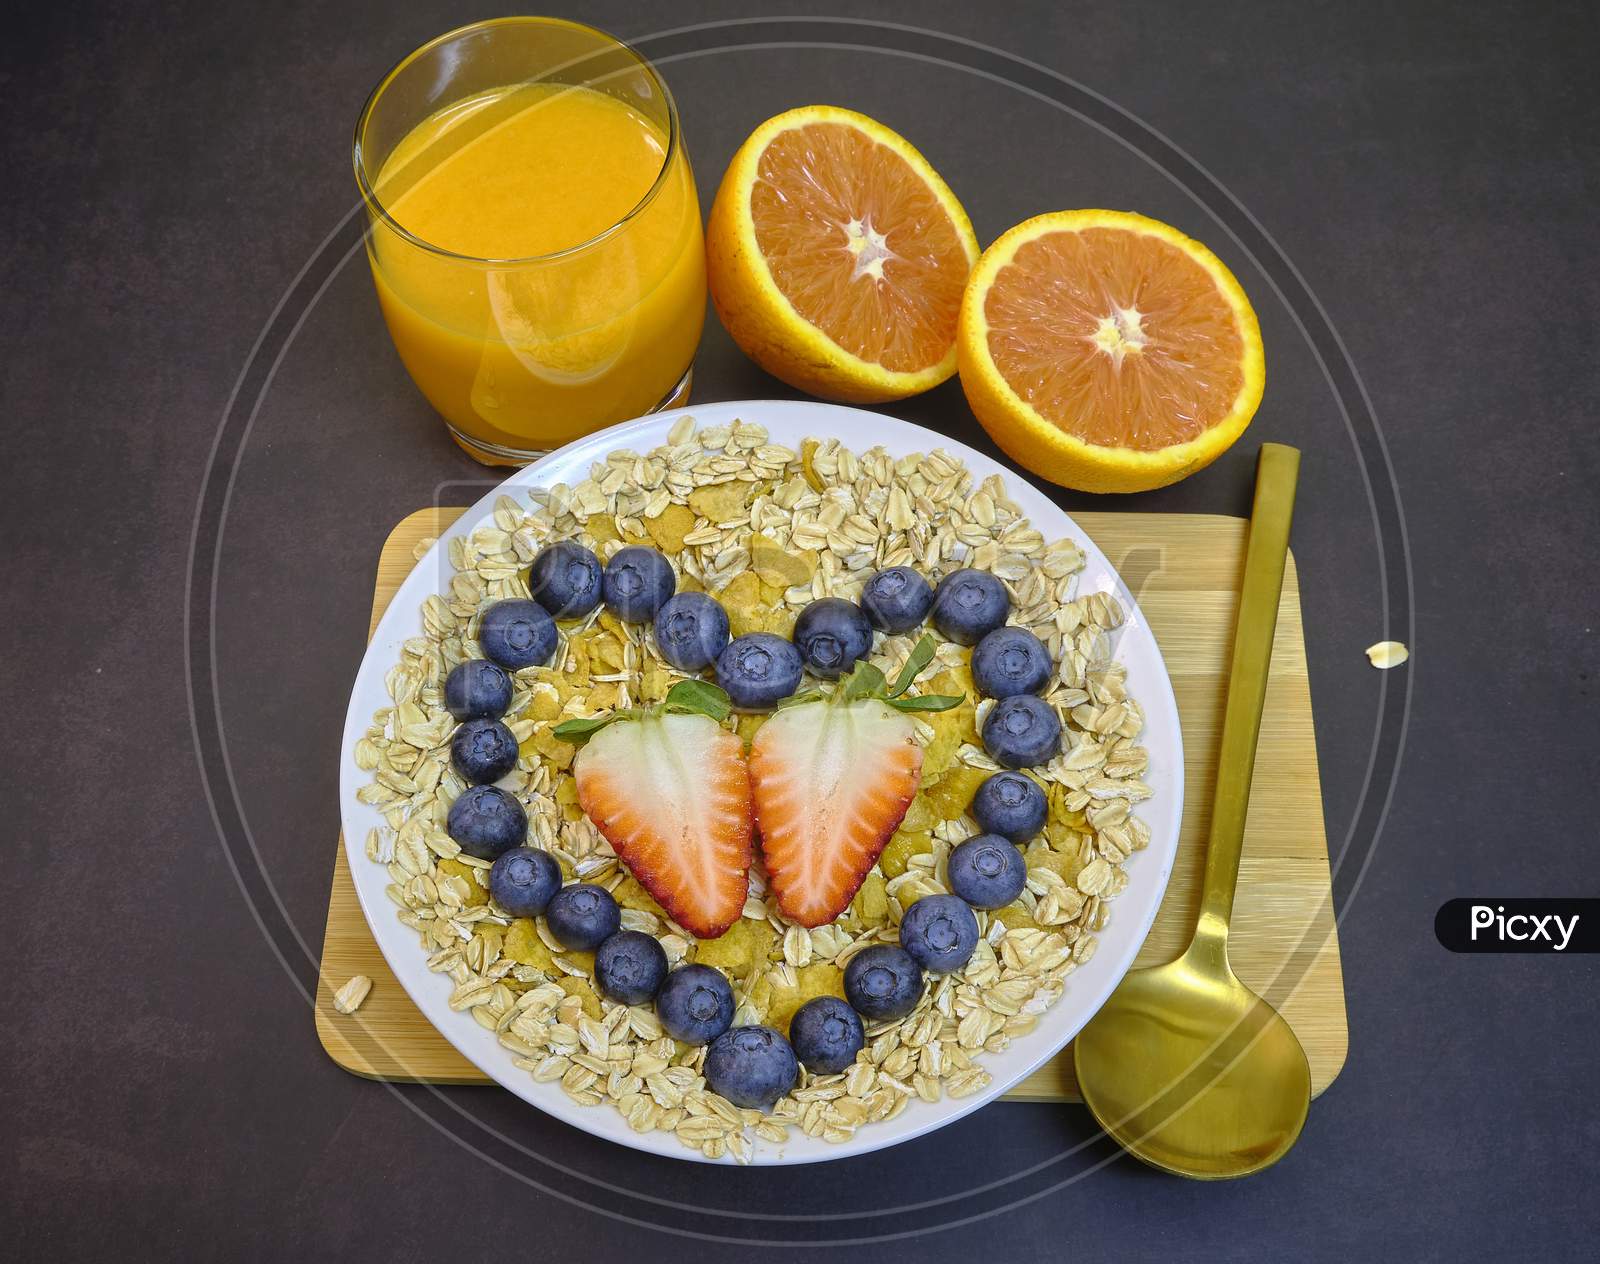 Healthy Breakfast With Fresh Fruits. Bowl Of Colorful Fruits With Love.